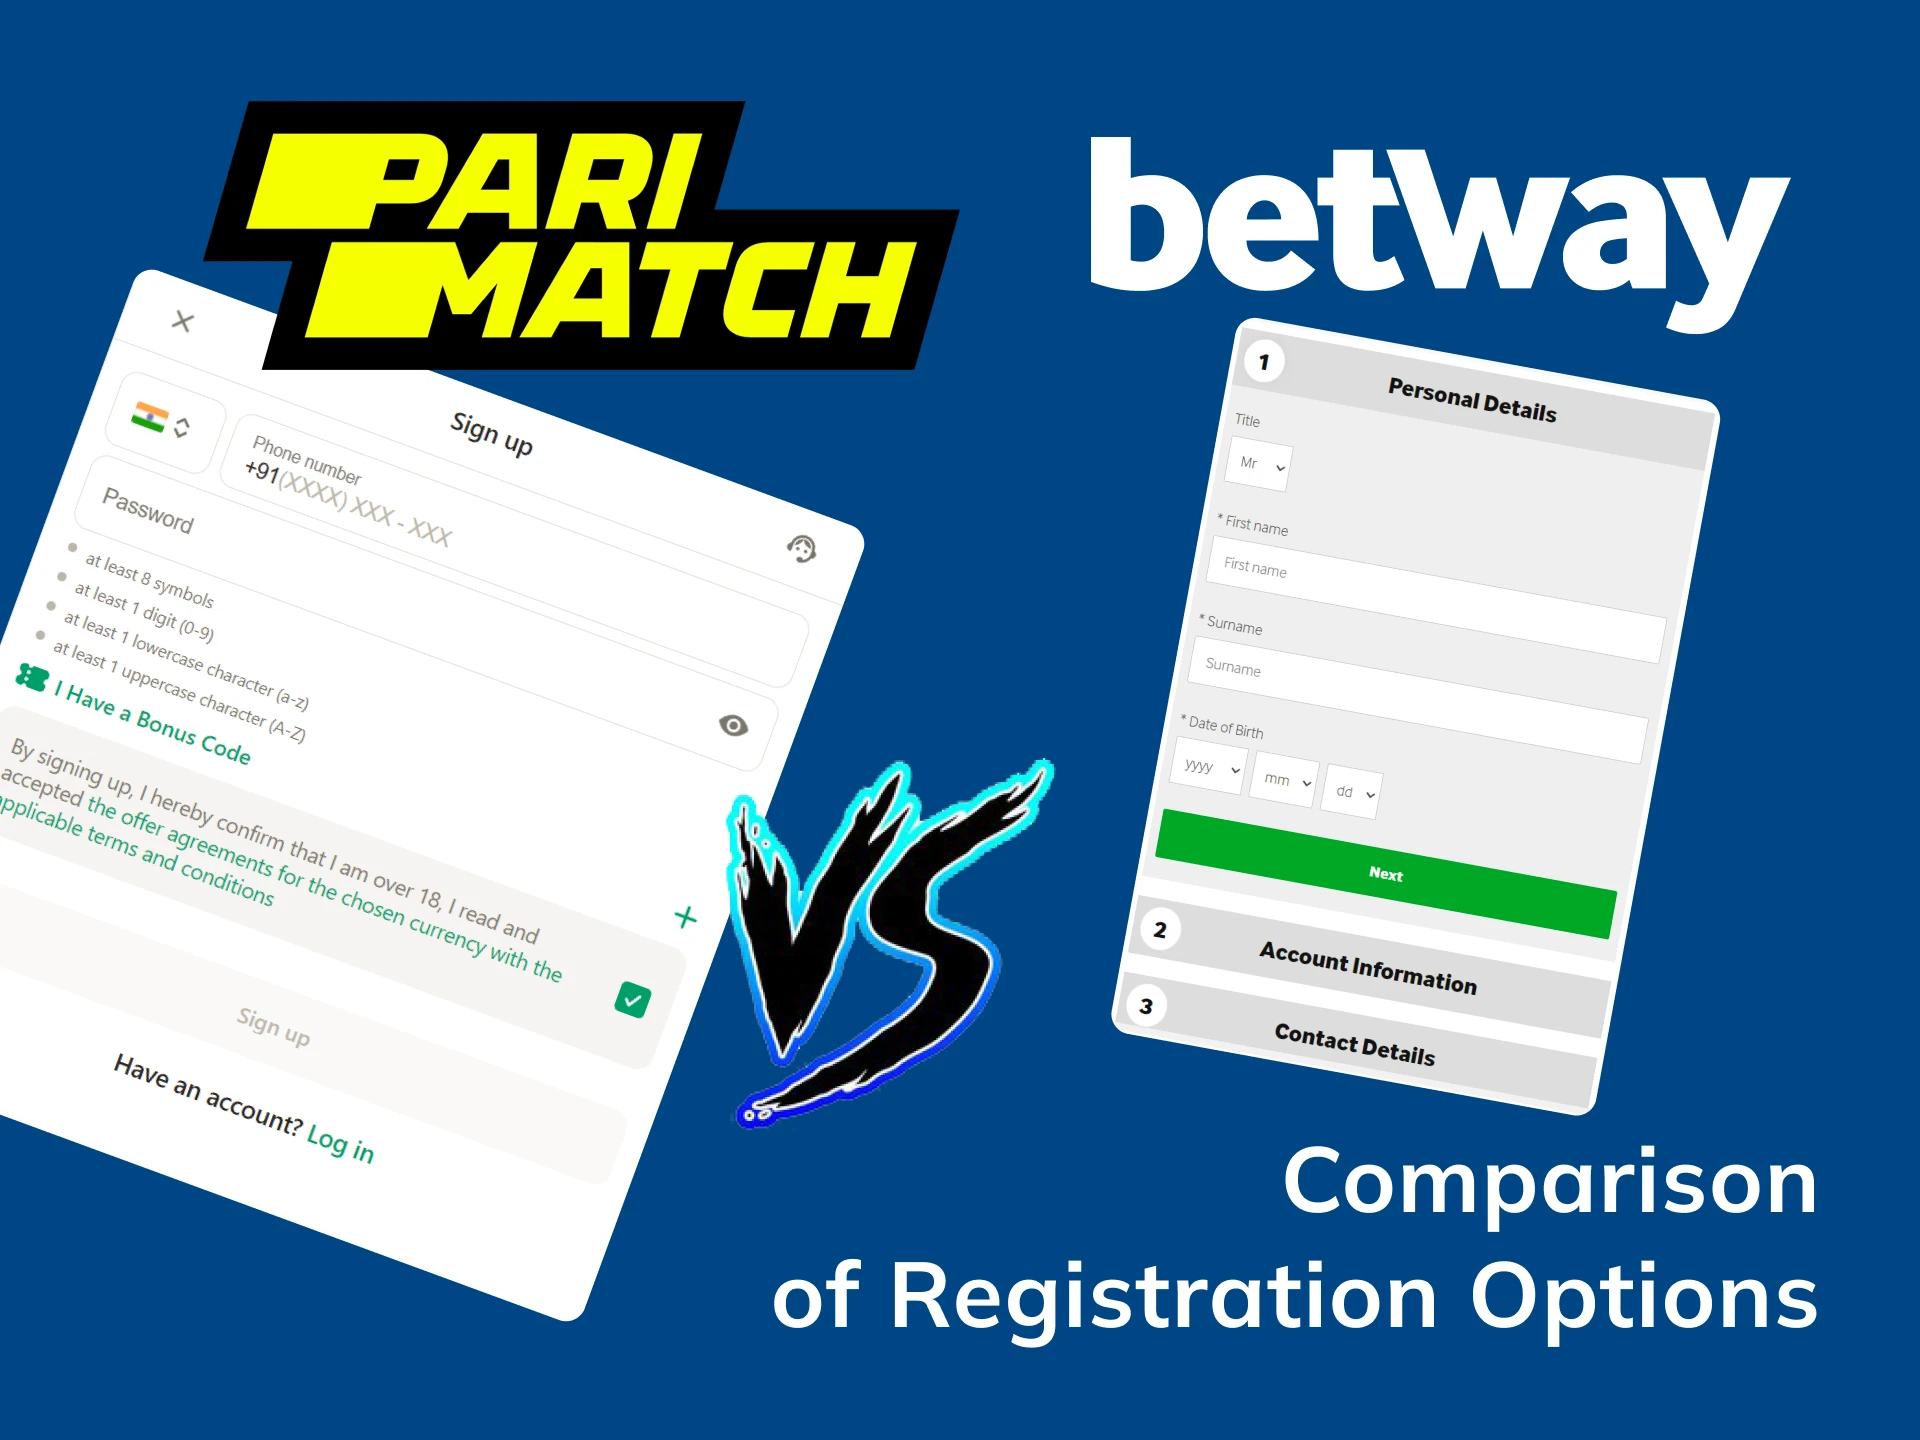 Compare the registrations on Parimatch and Betway.